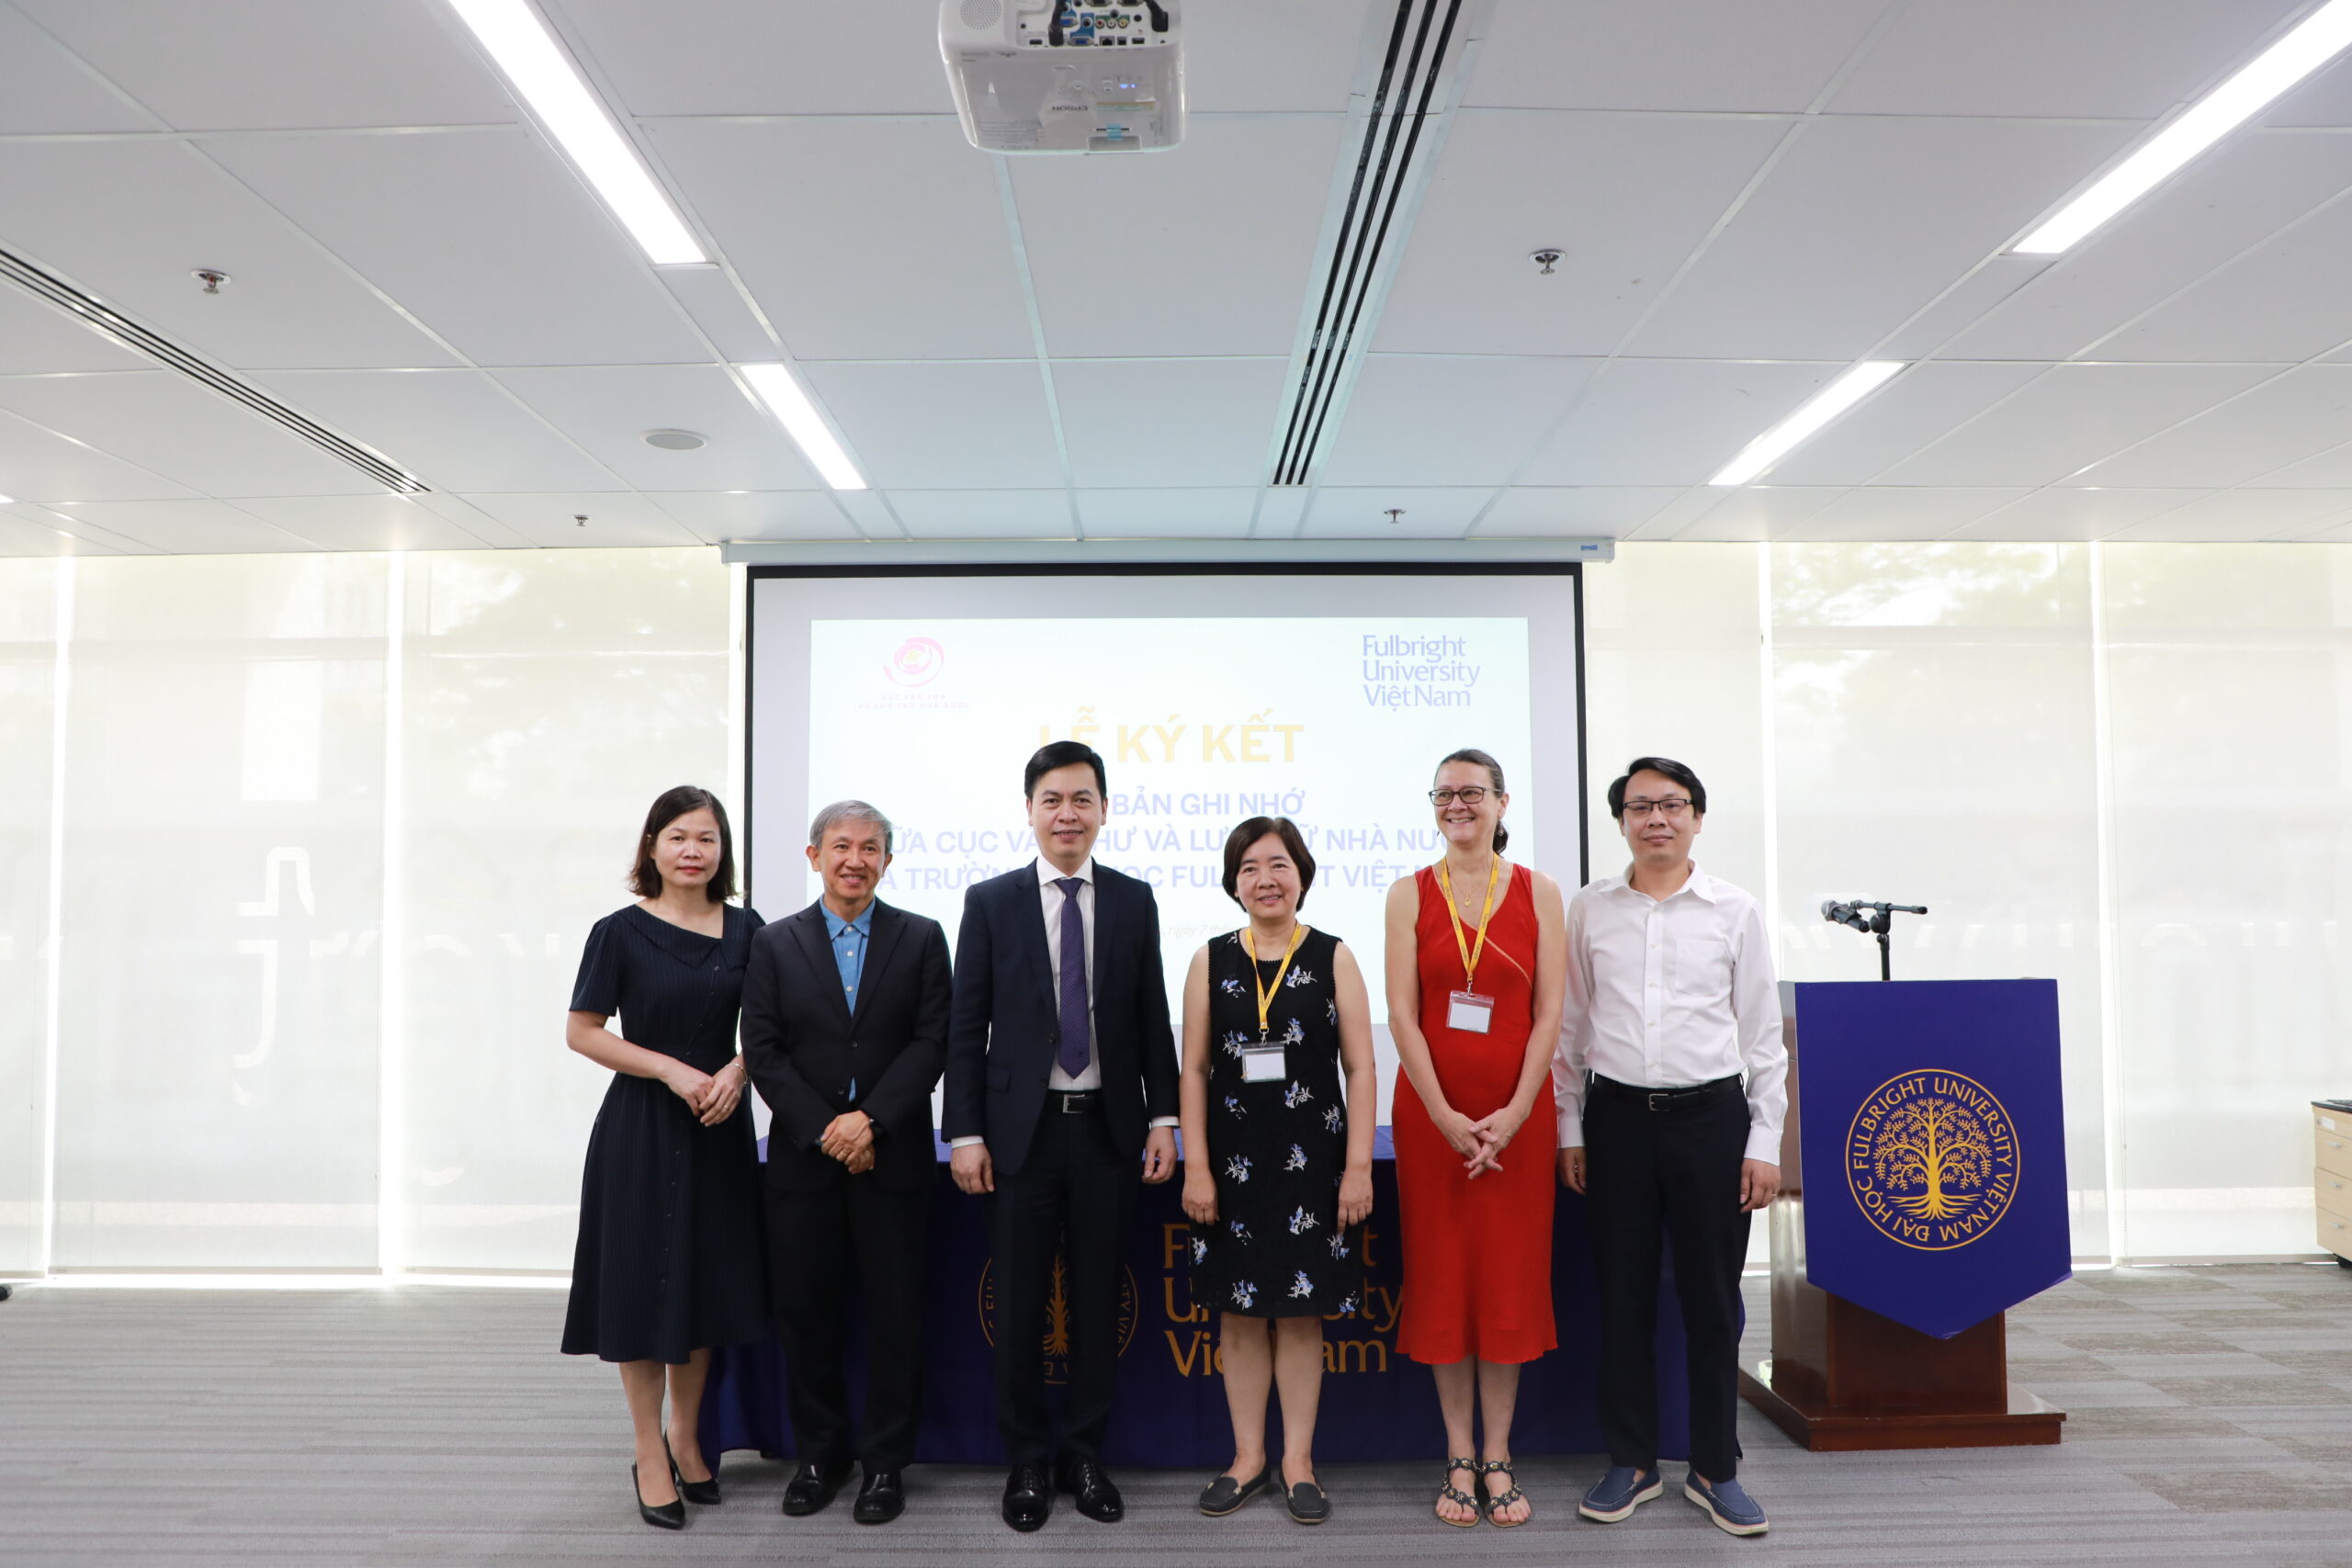 Fulbright University Vietnam signs MOU with the State Records and Archives  Management Department of Vietnam, officially founds Vietnam Studies Center  - Fulbright University Vietnam